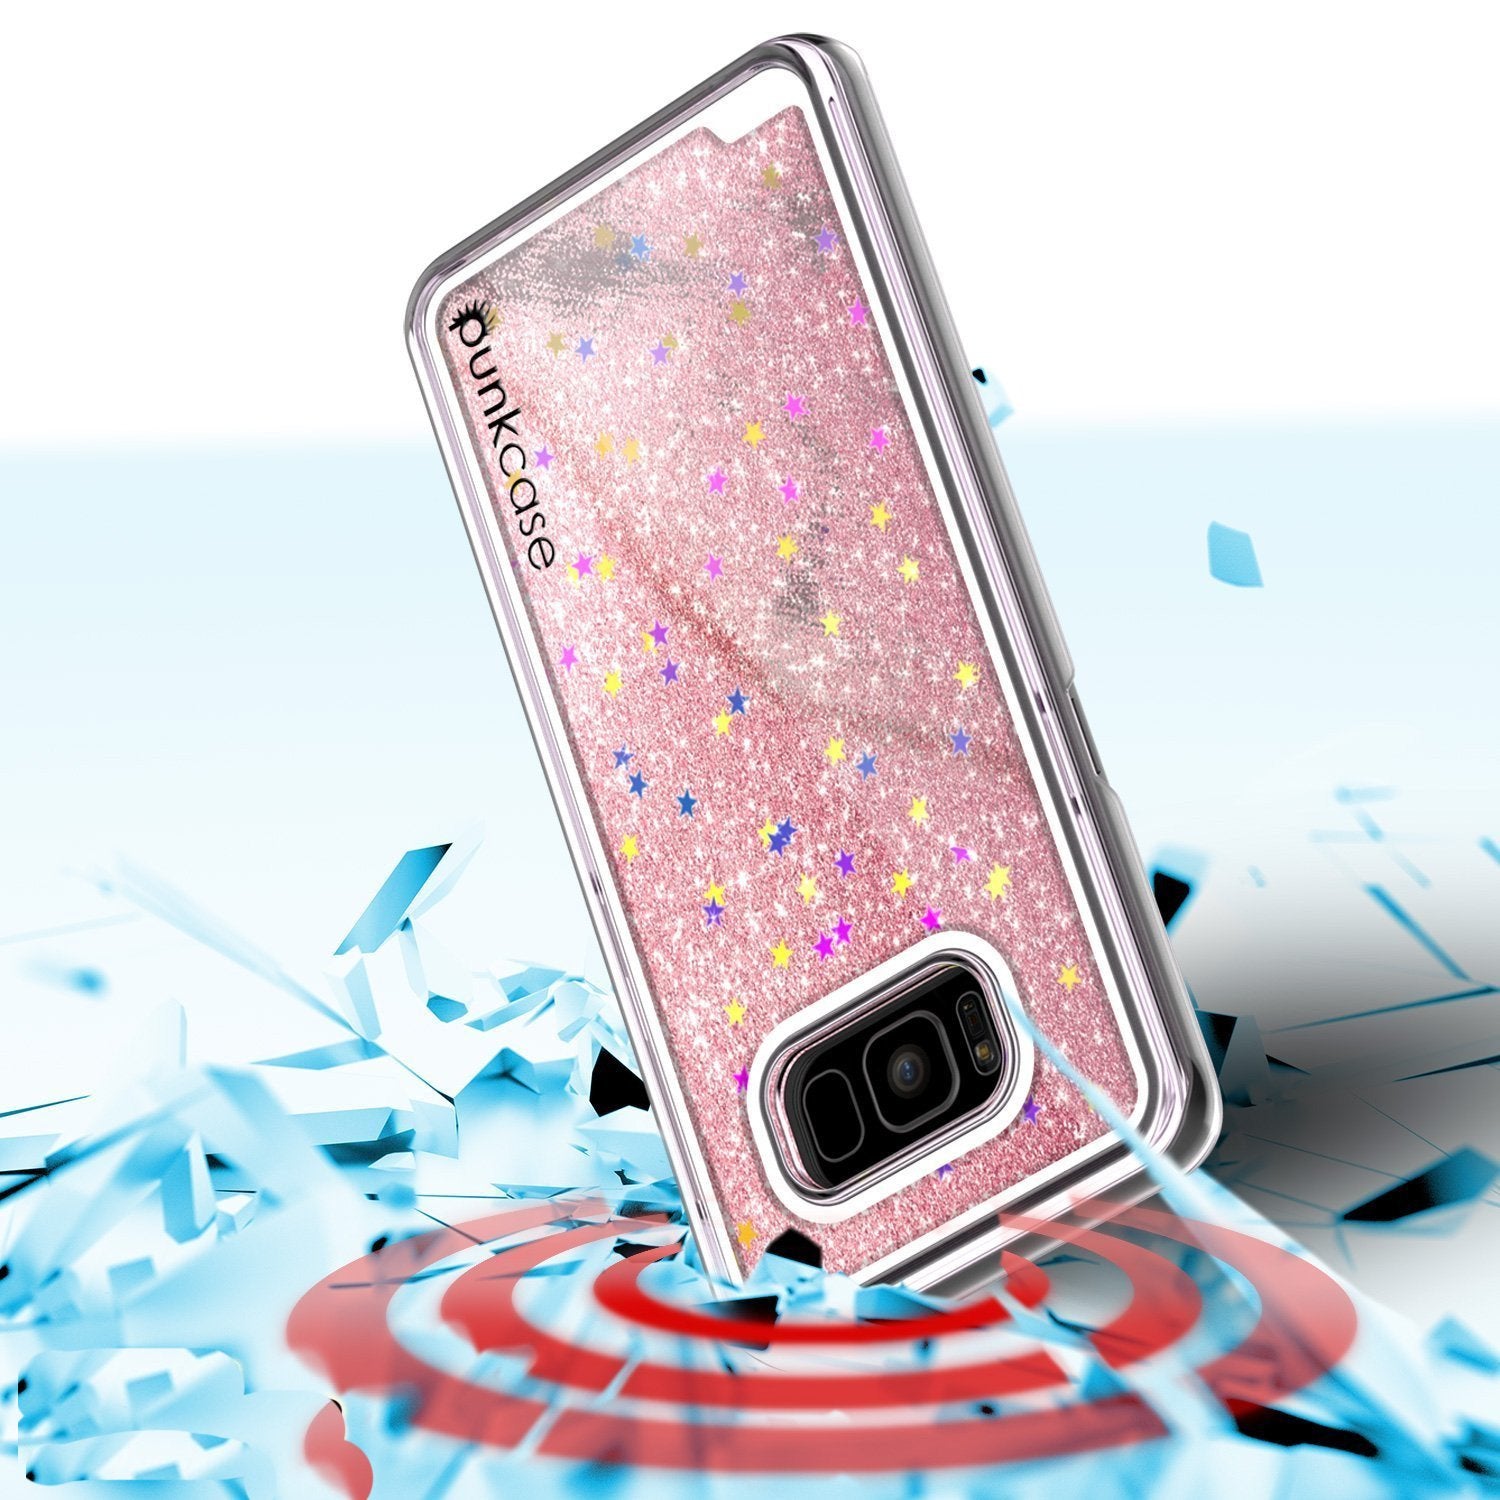 Galaxy S8 Case, Punkcase Liquid Rose Gold Series Protective Dual Layer Floating Glitter Cover